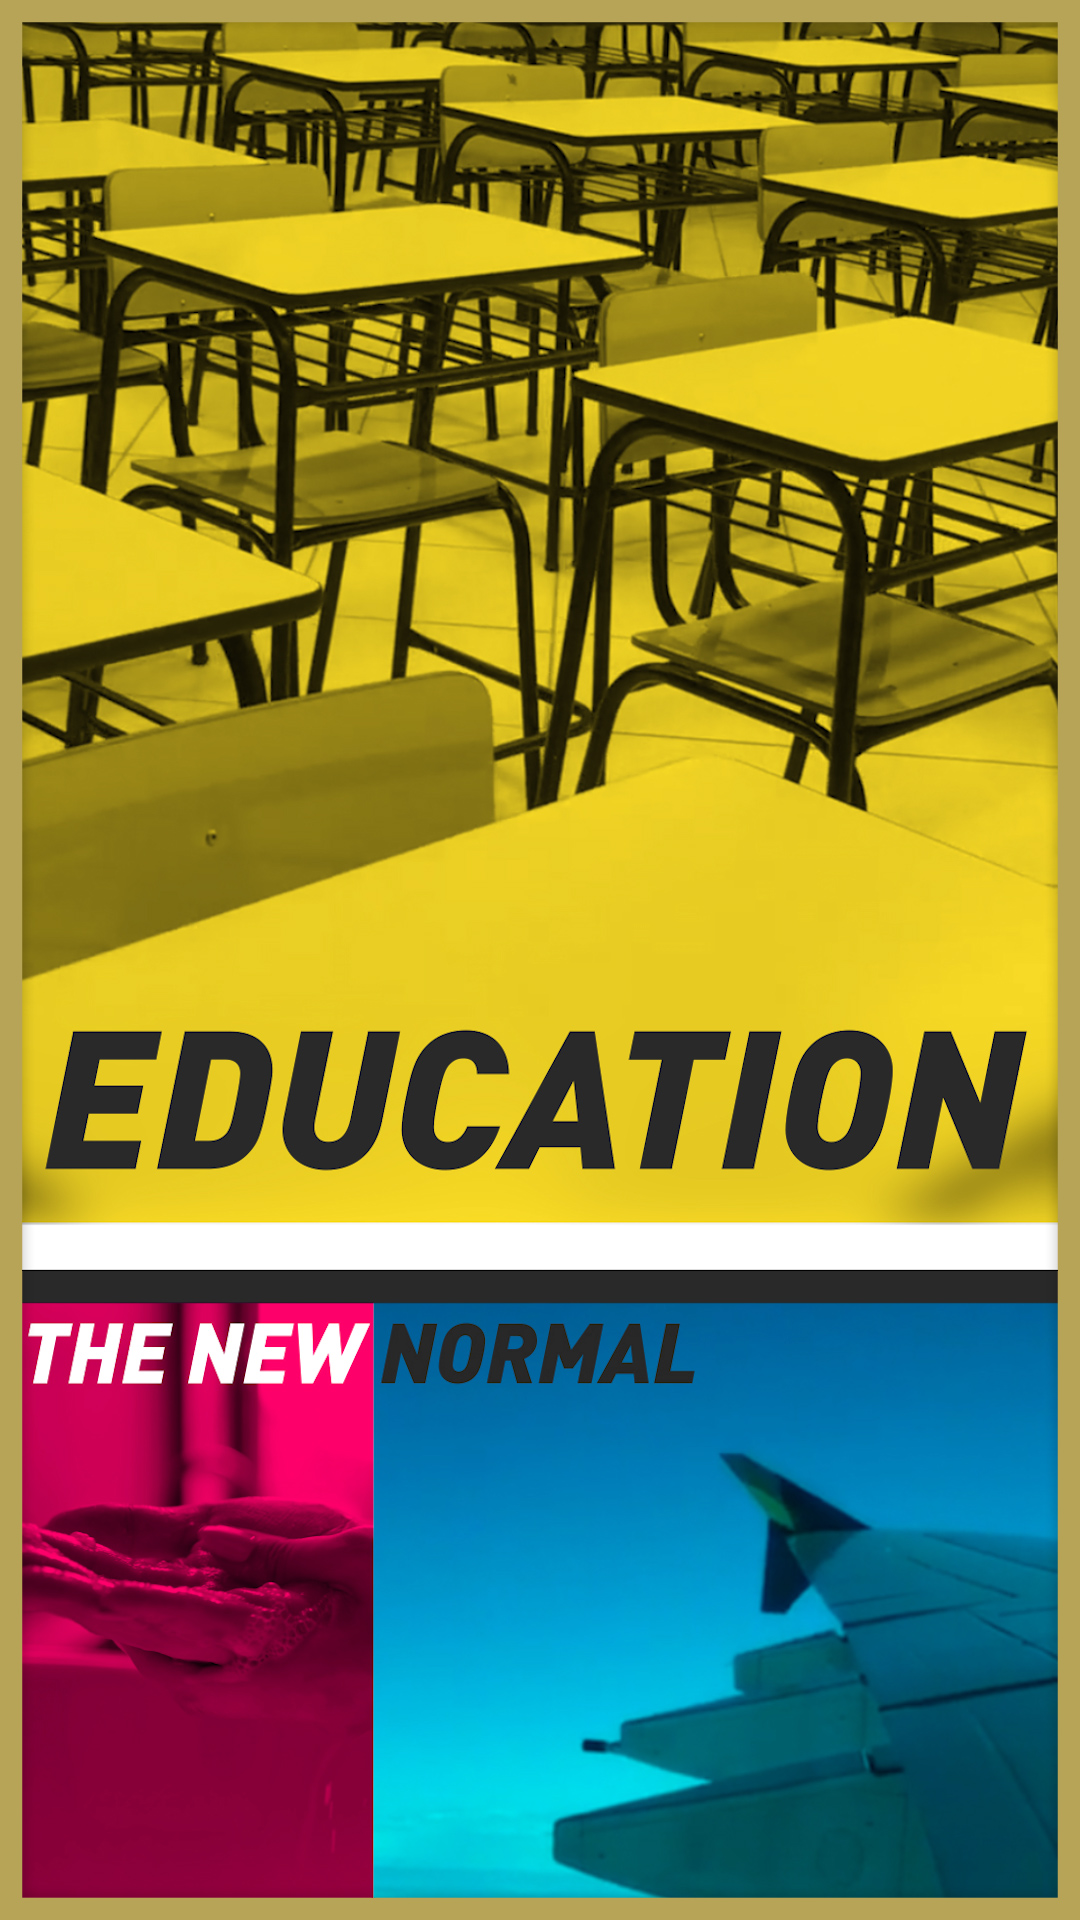 news article about new normal education